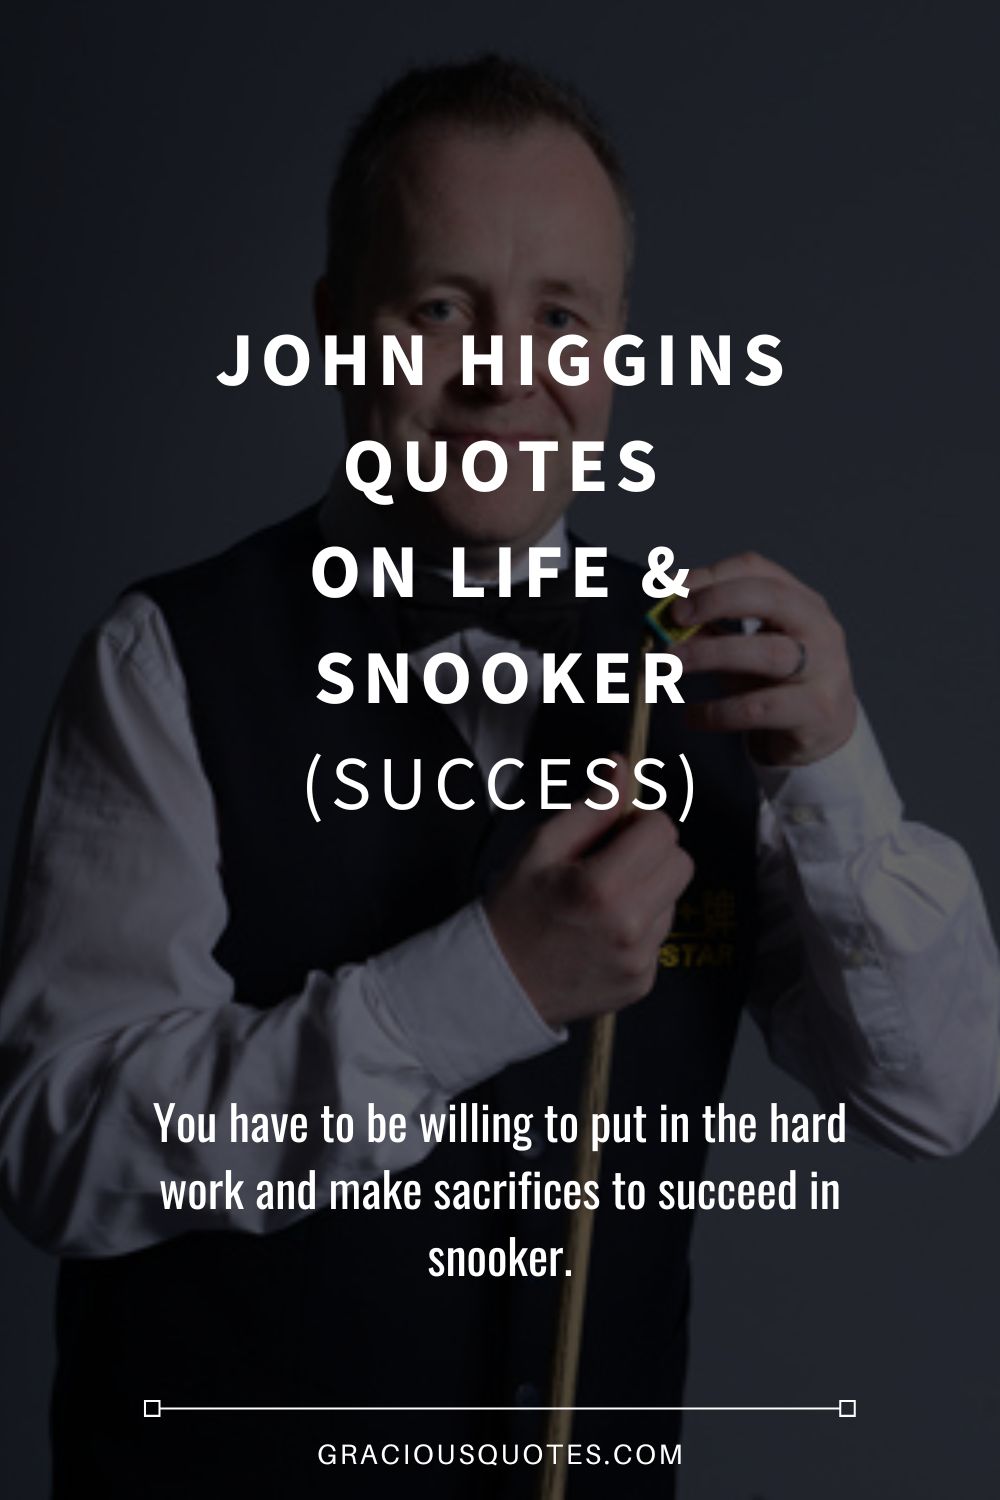 John Higgins Quotes on Life & Snooker (SUCCESS) - Gracious Quotes